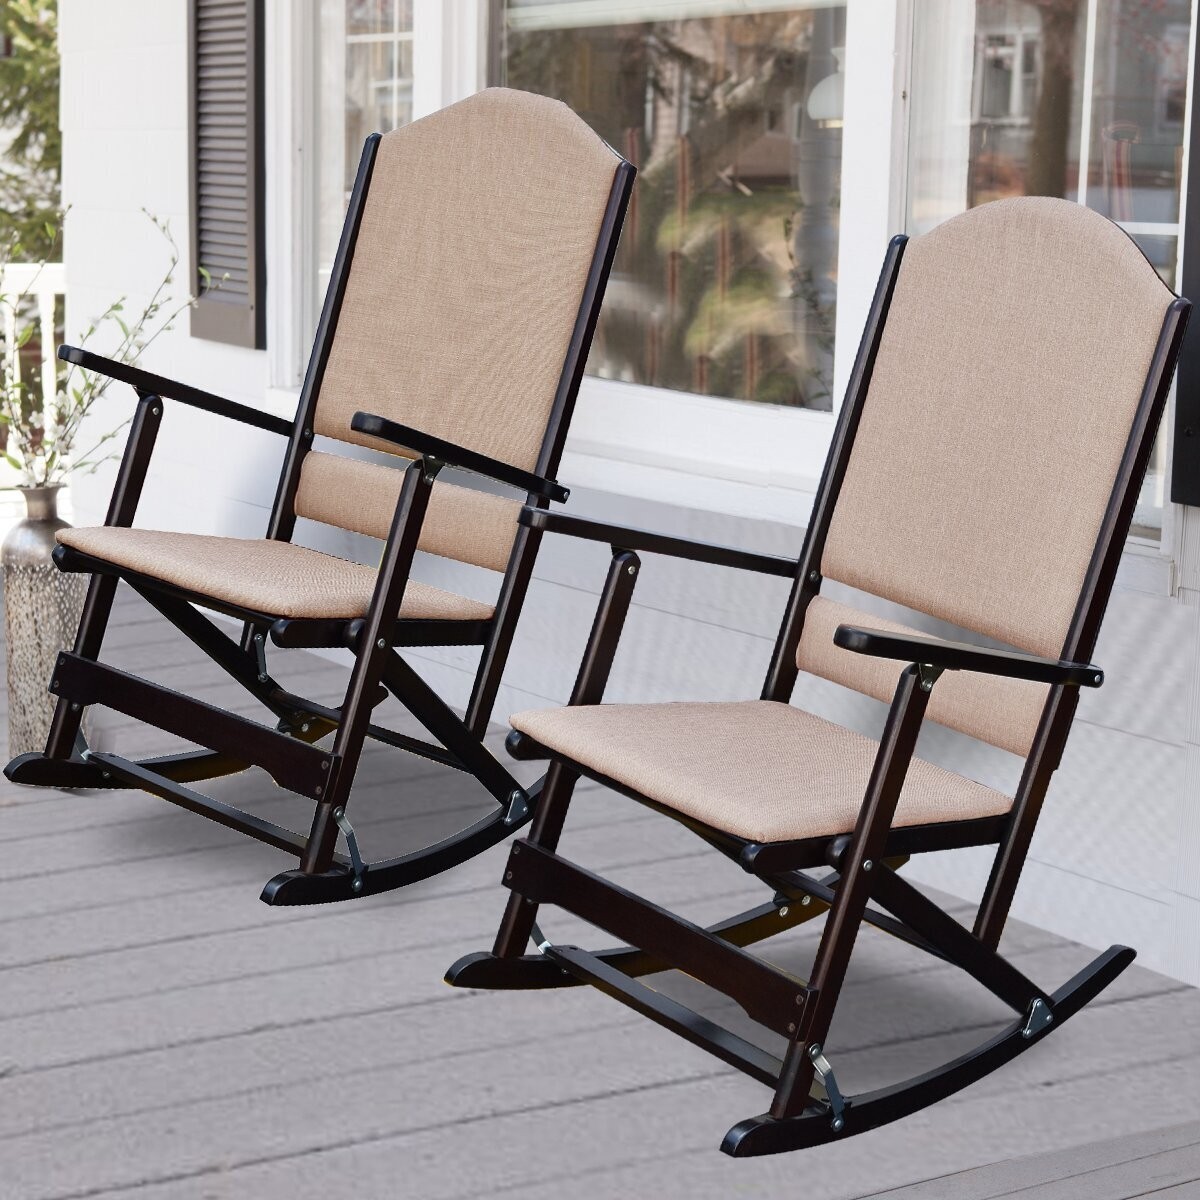 How To Choose A Rocking Chair - Foter